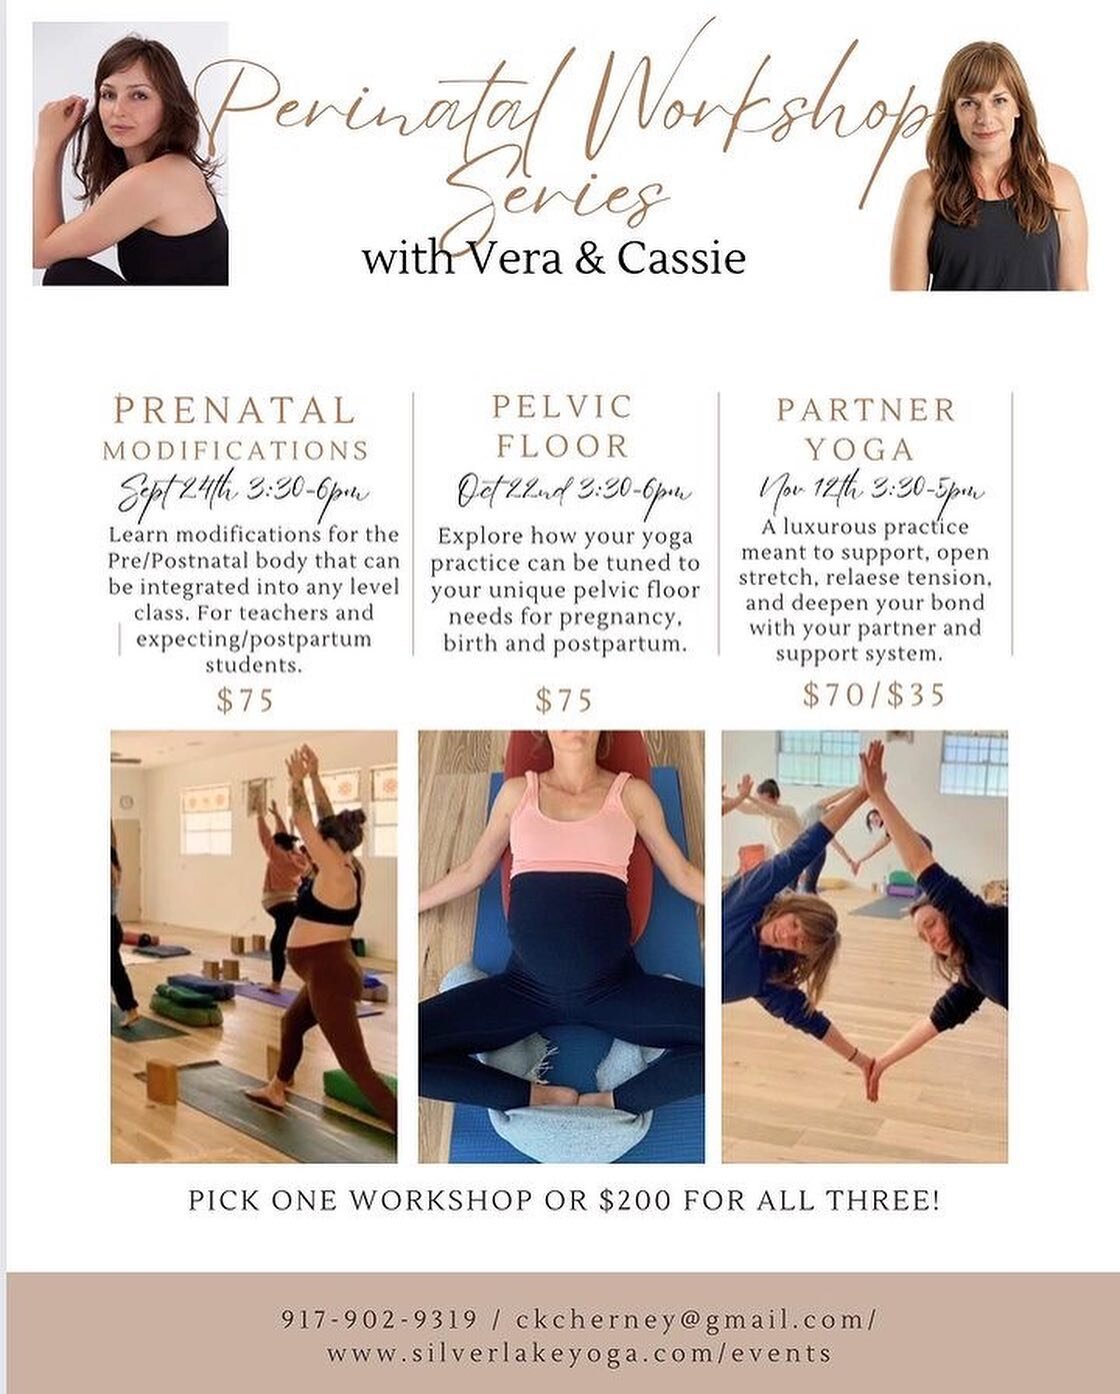 Excited to offer these series of workshops with awesome @ckcherney dedicated towards deepening your understanding of the pregnant and postpartum body. This is a great opportunity for yoga teachers looking to expand on their training as well as expect